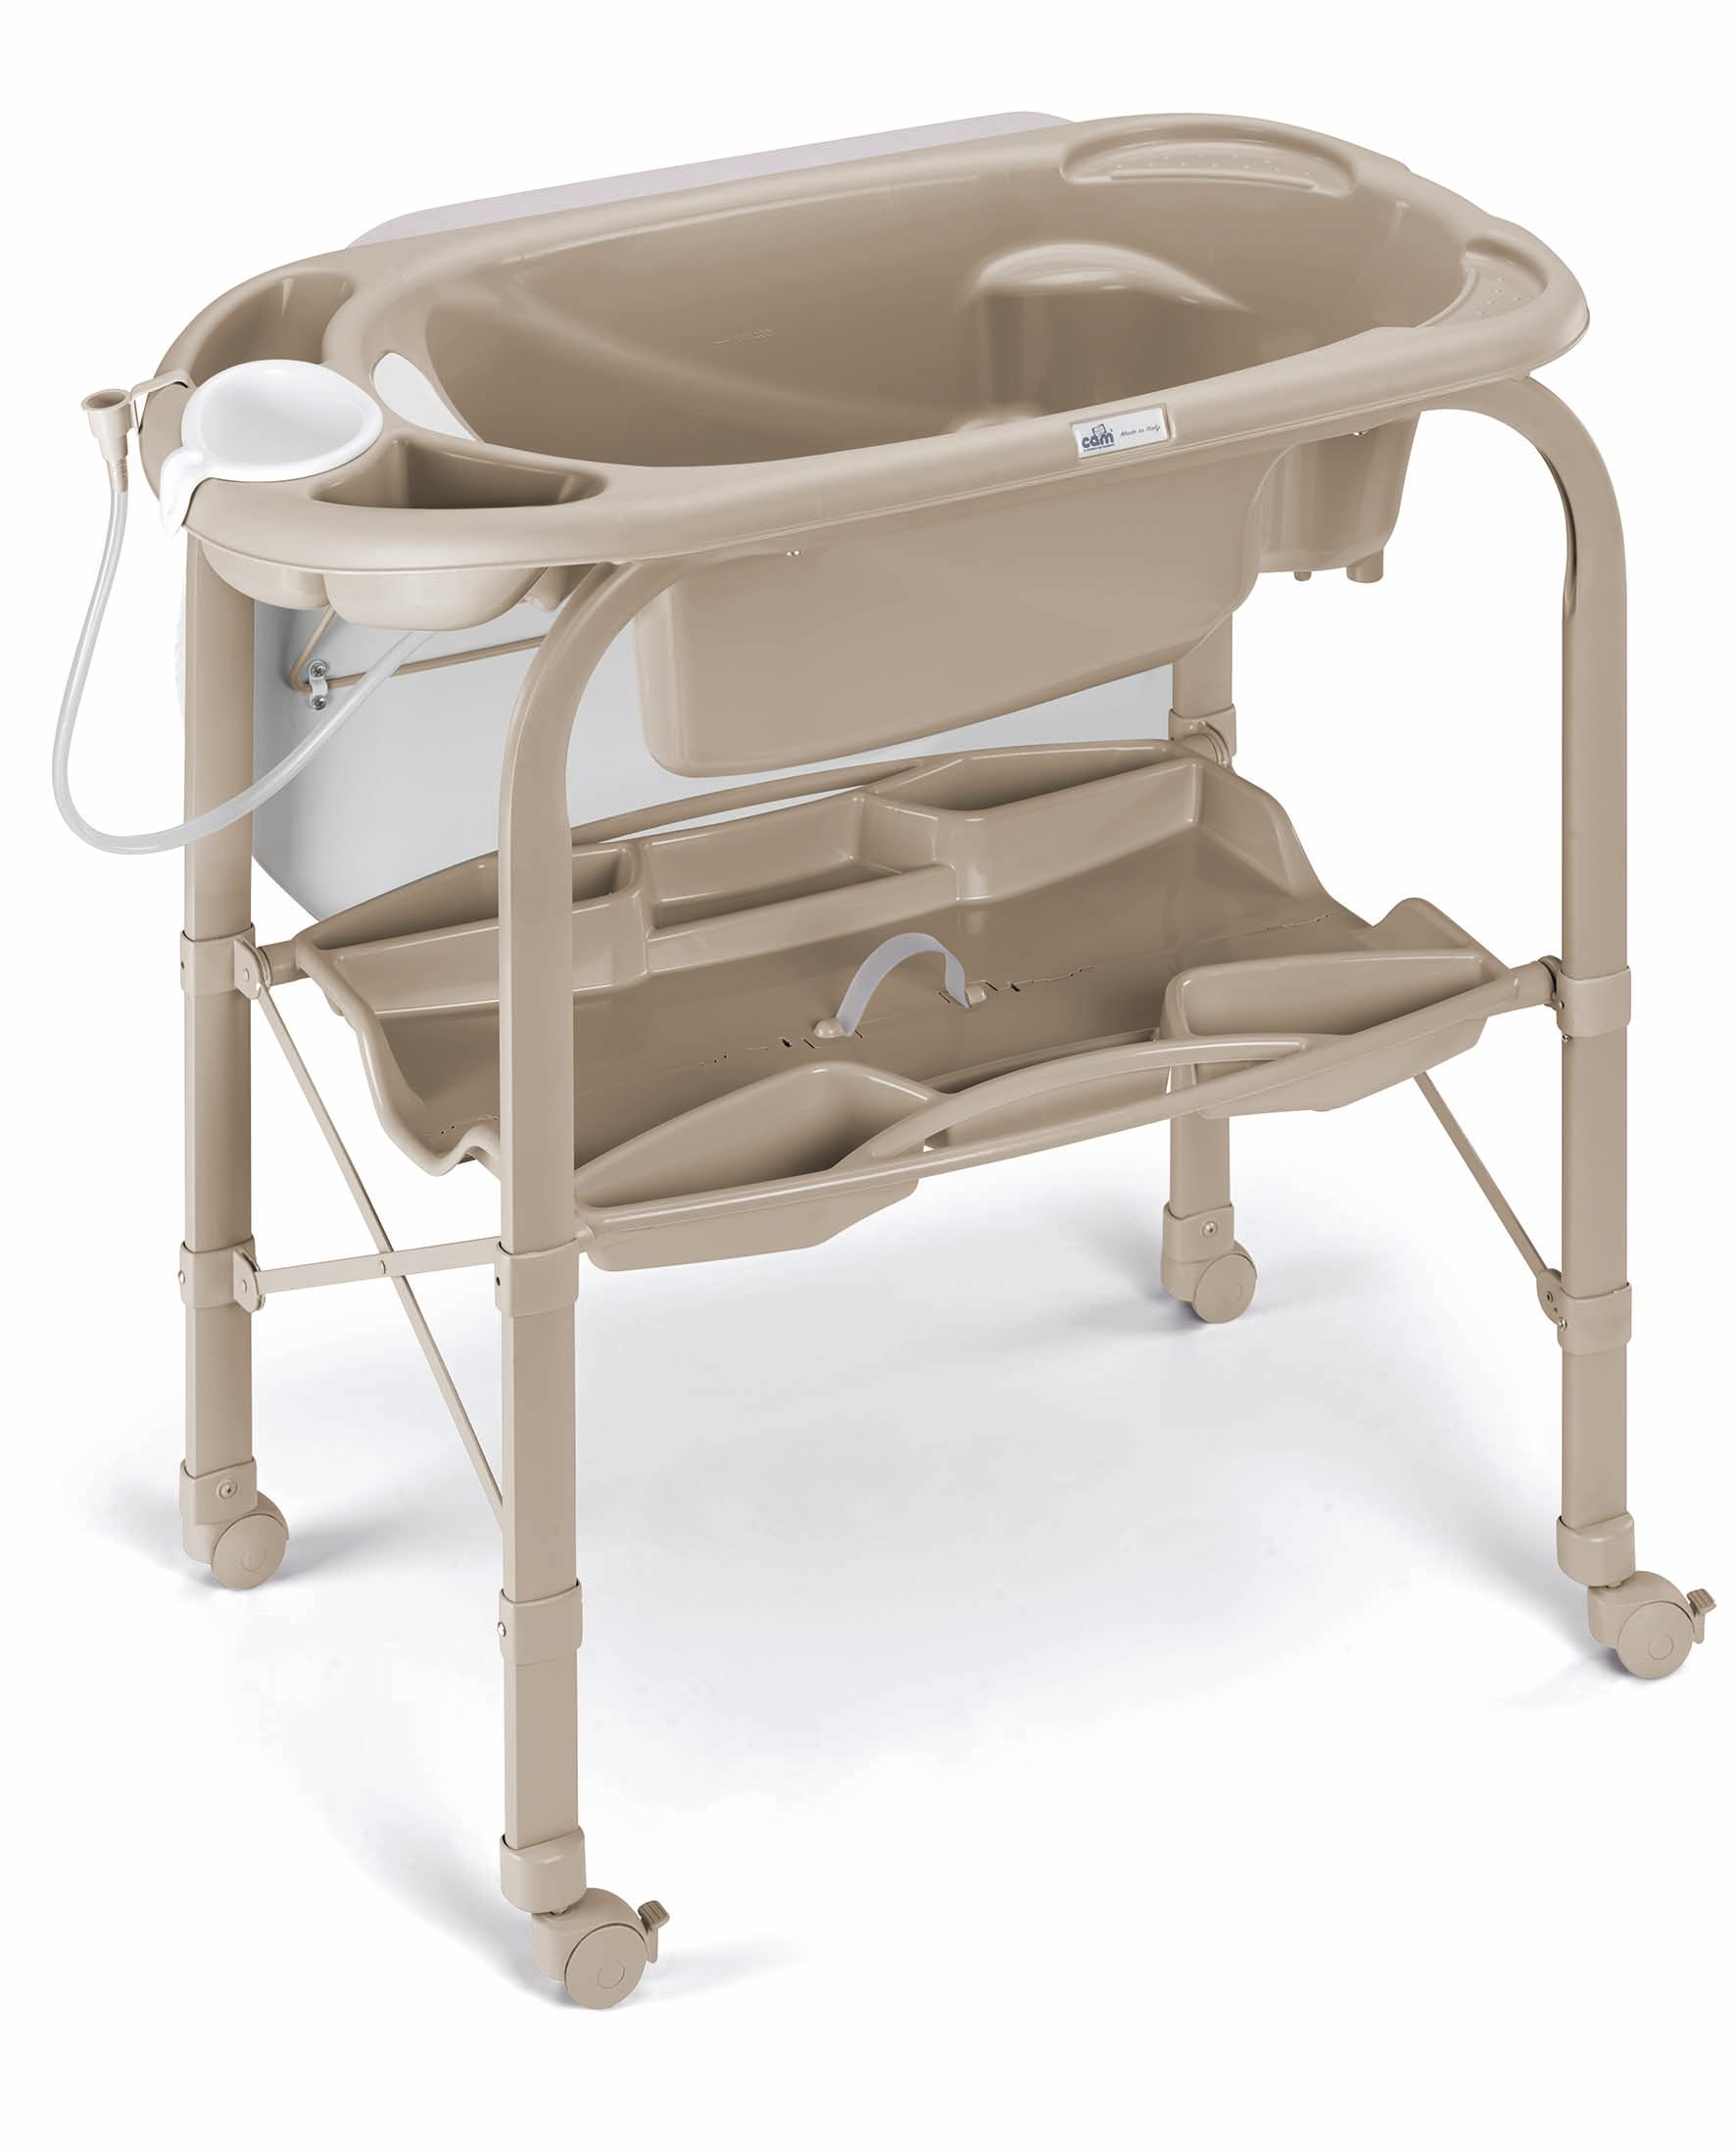 'Cambio' Baby Bath and Changing Station